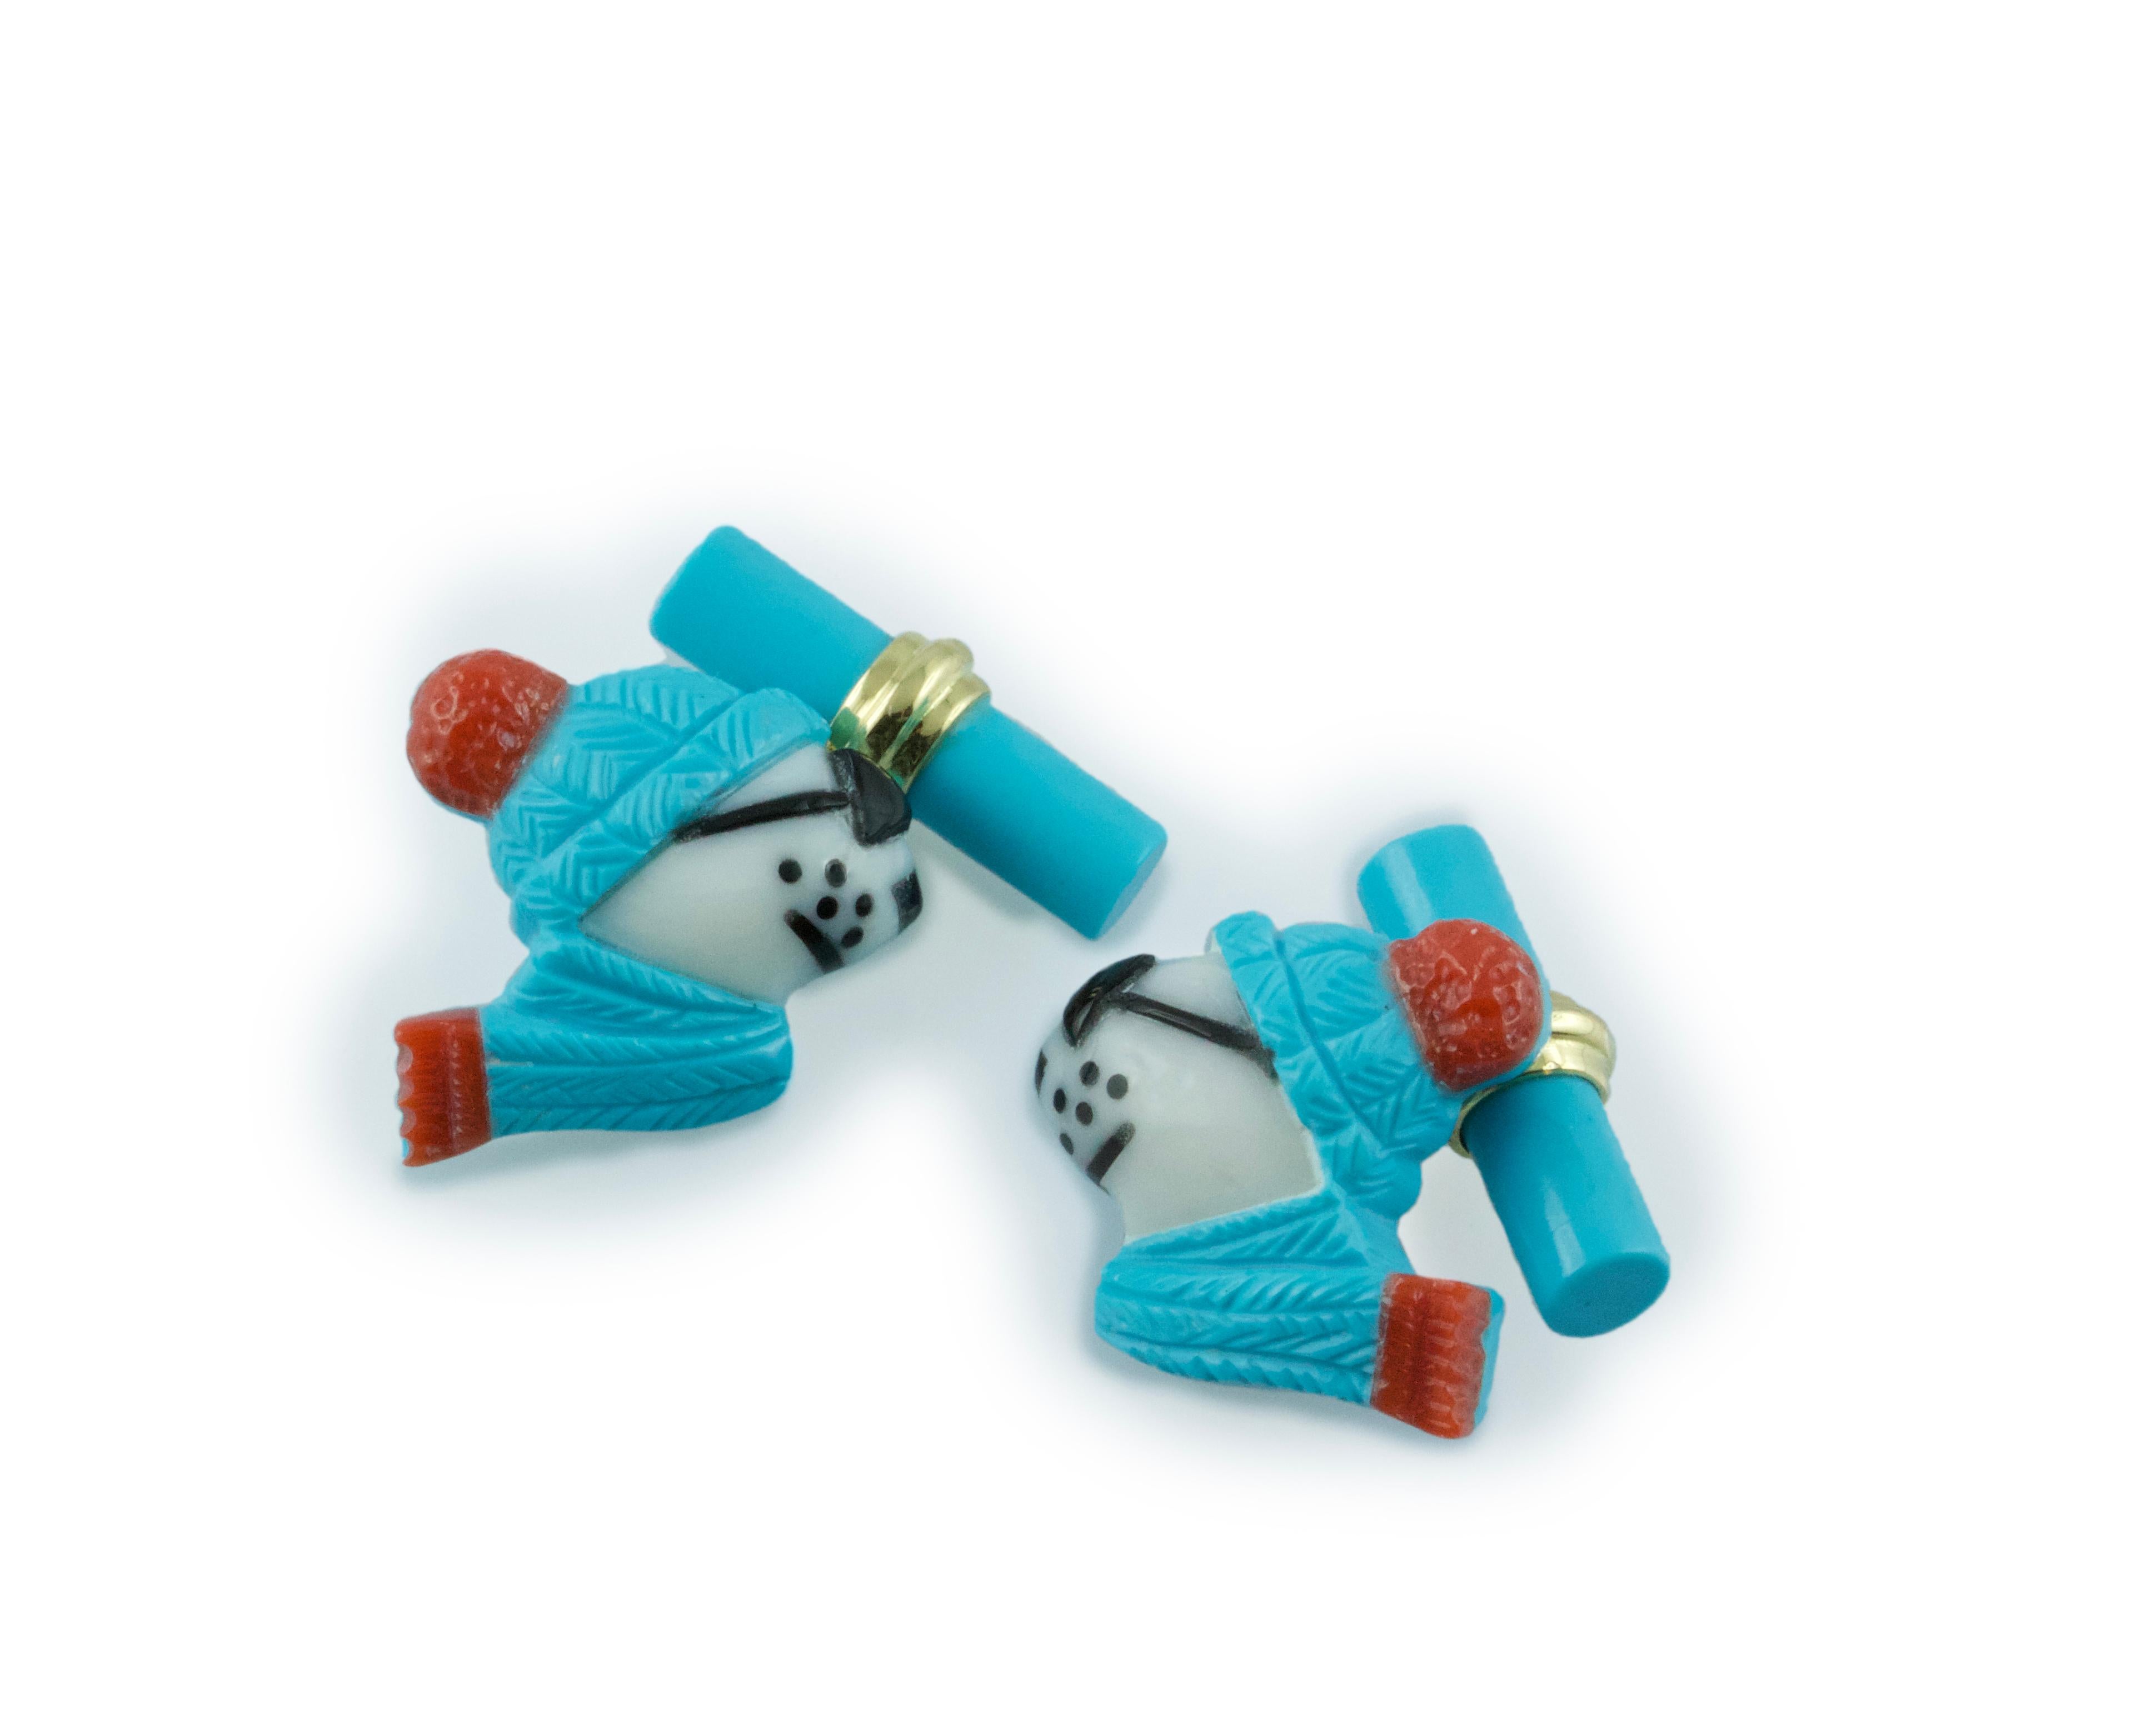 This playful pair of cufflinks depicts the profile of a polar bear portrayed as if dressed up for the winter with sunglasses, scarf, and hat. The animal is made of turquoise  which is also used to make the cylindrical toggle, accents in coral. The